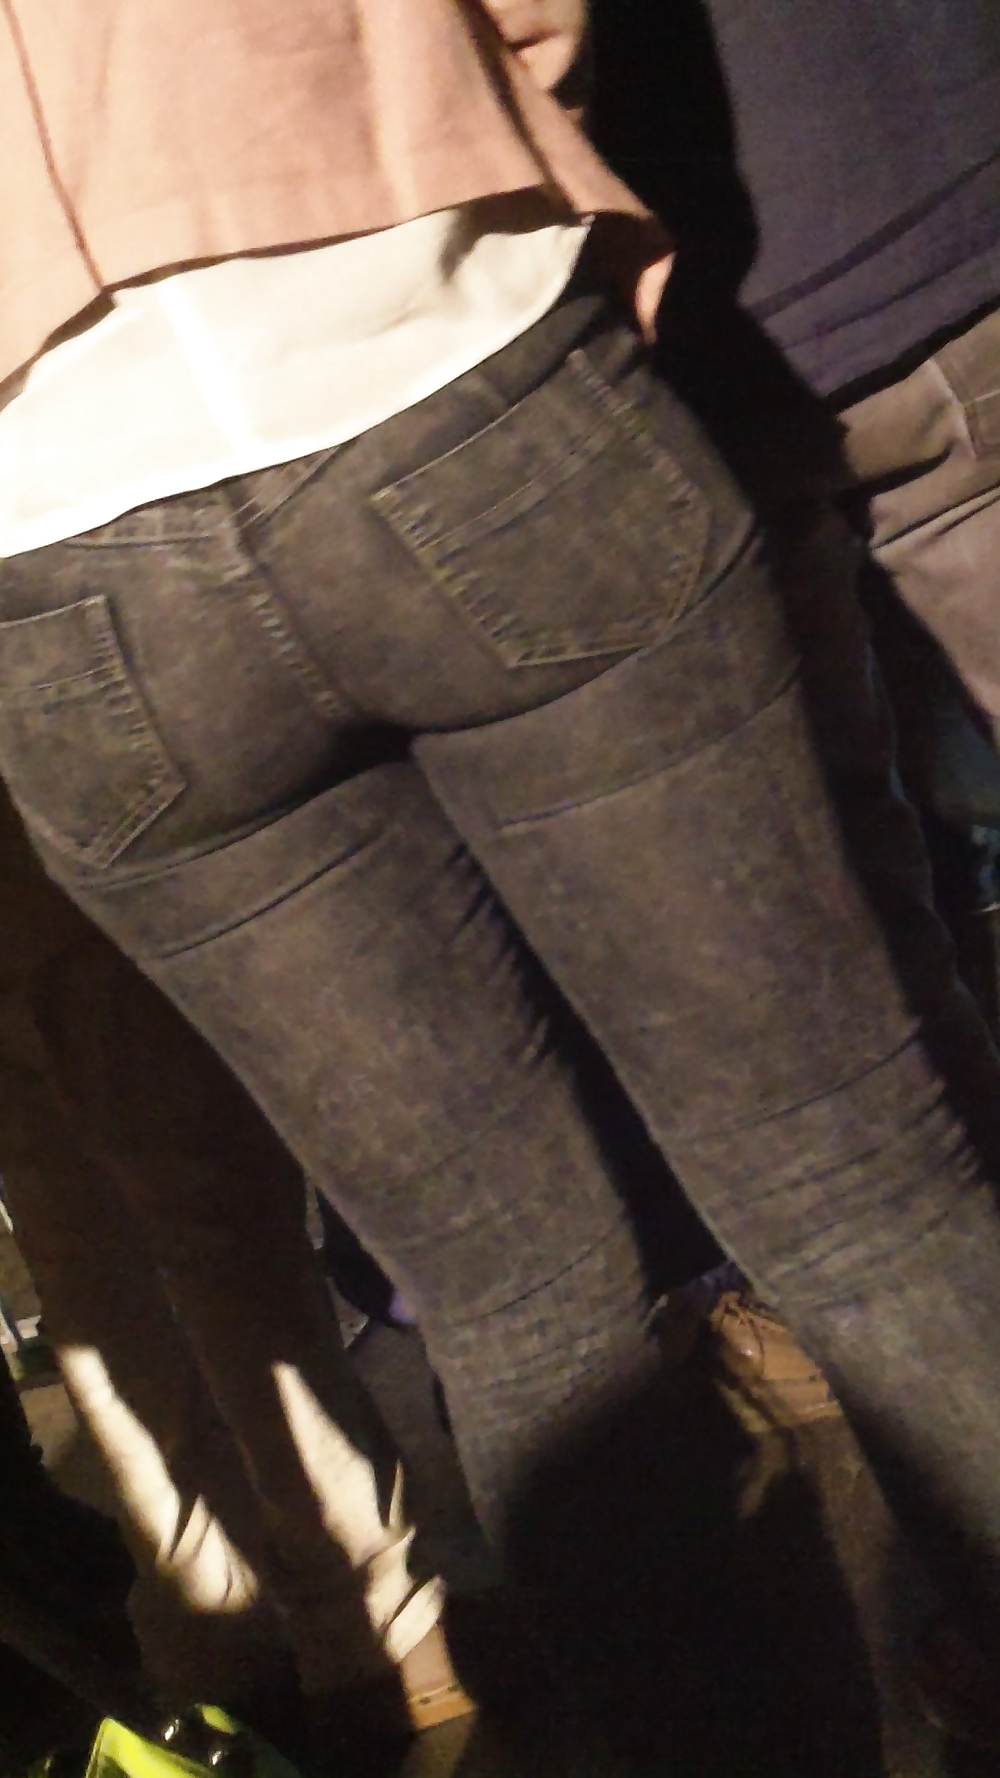 Tight teen butts & ass in jeans up close  #20660992